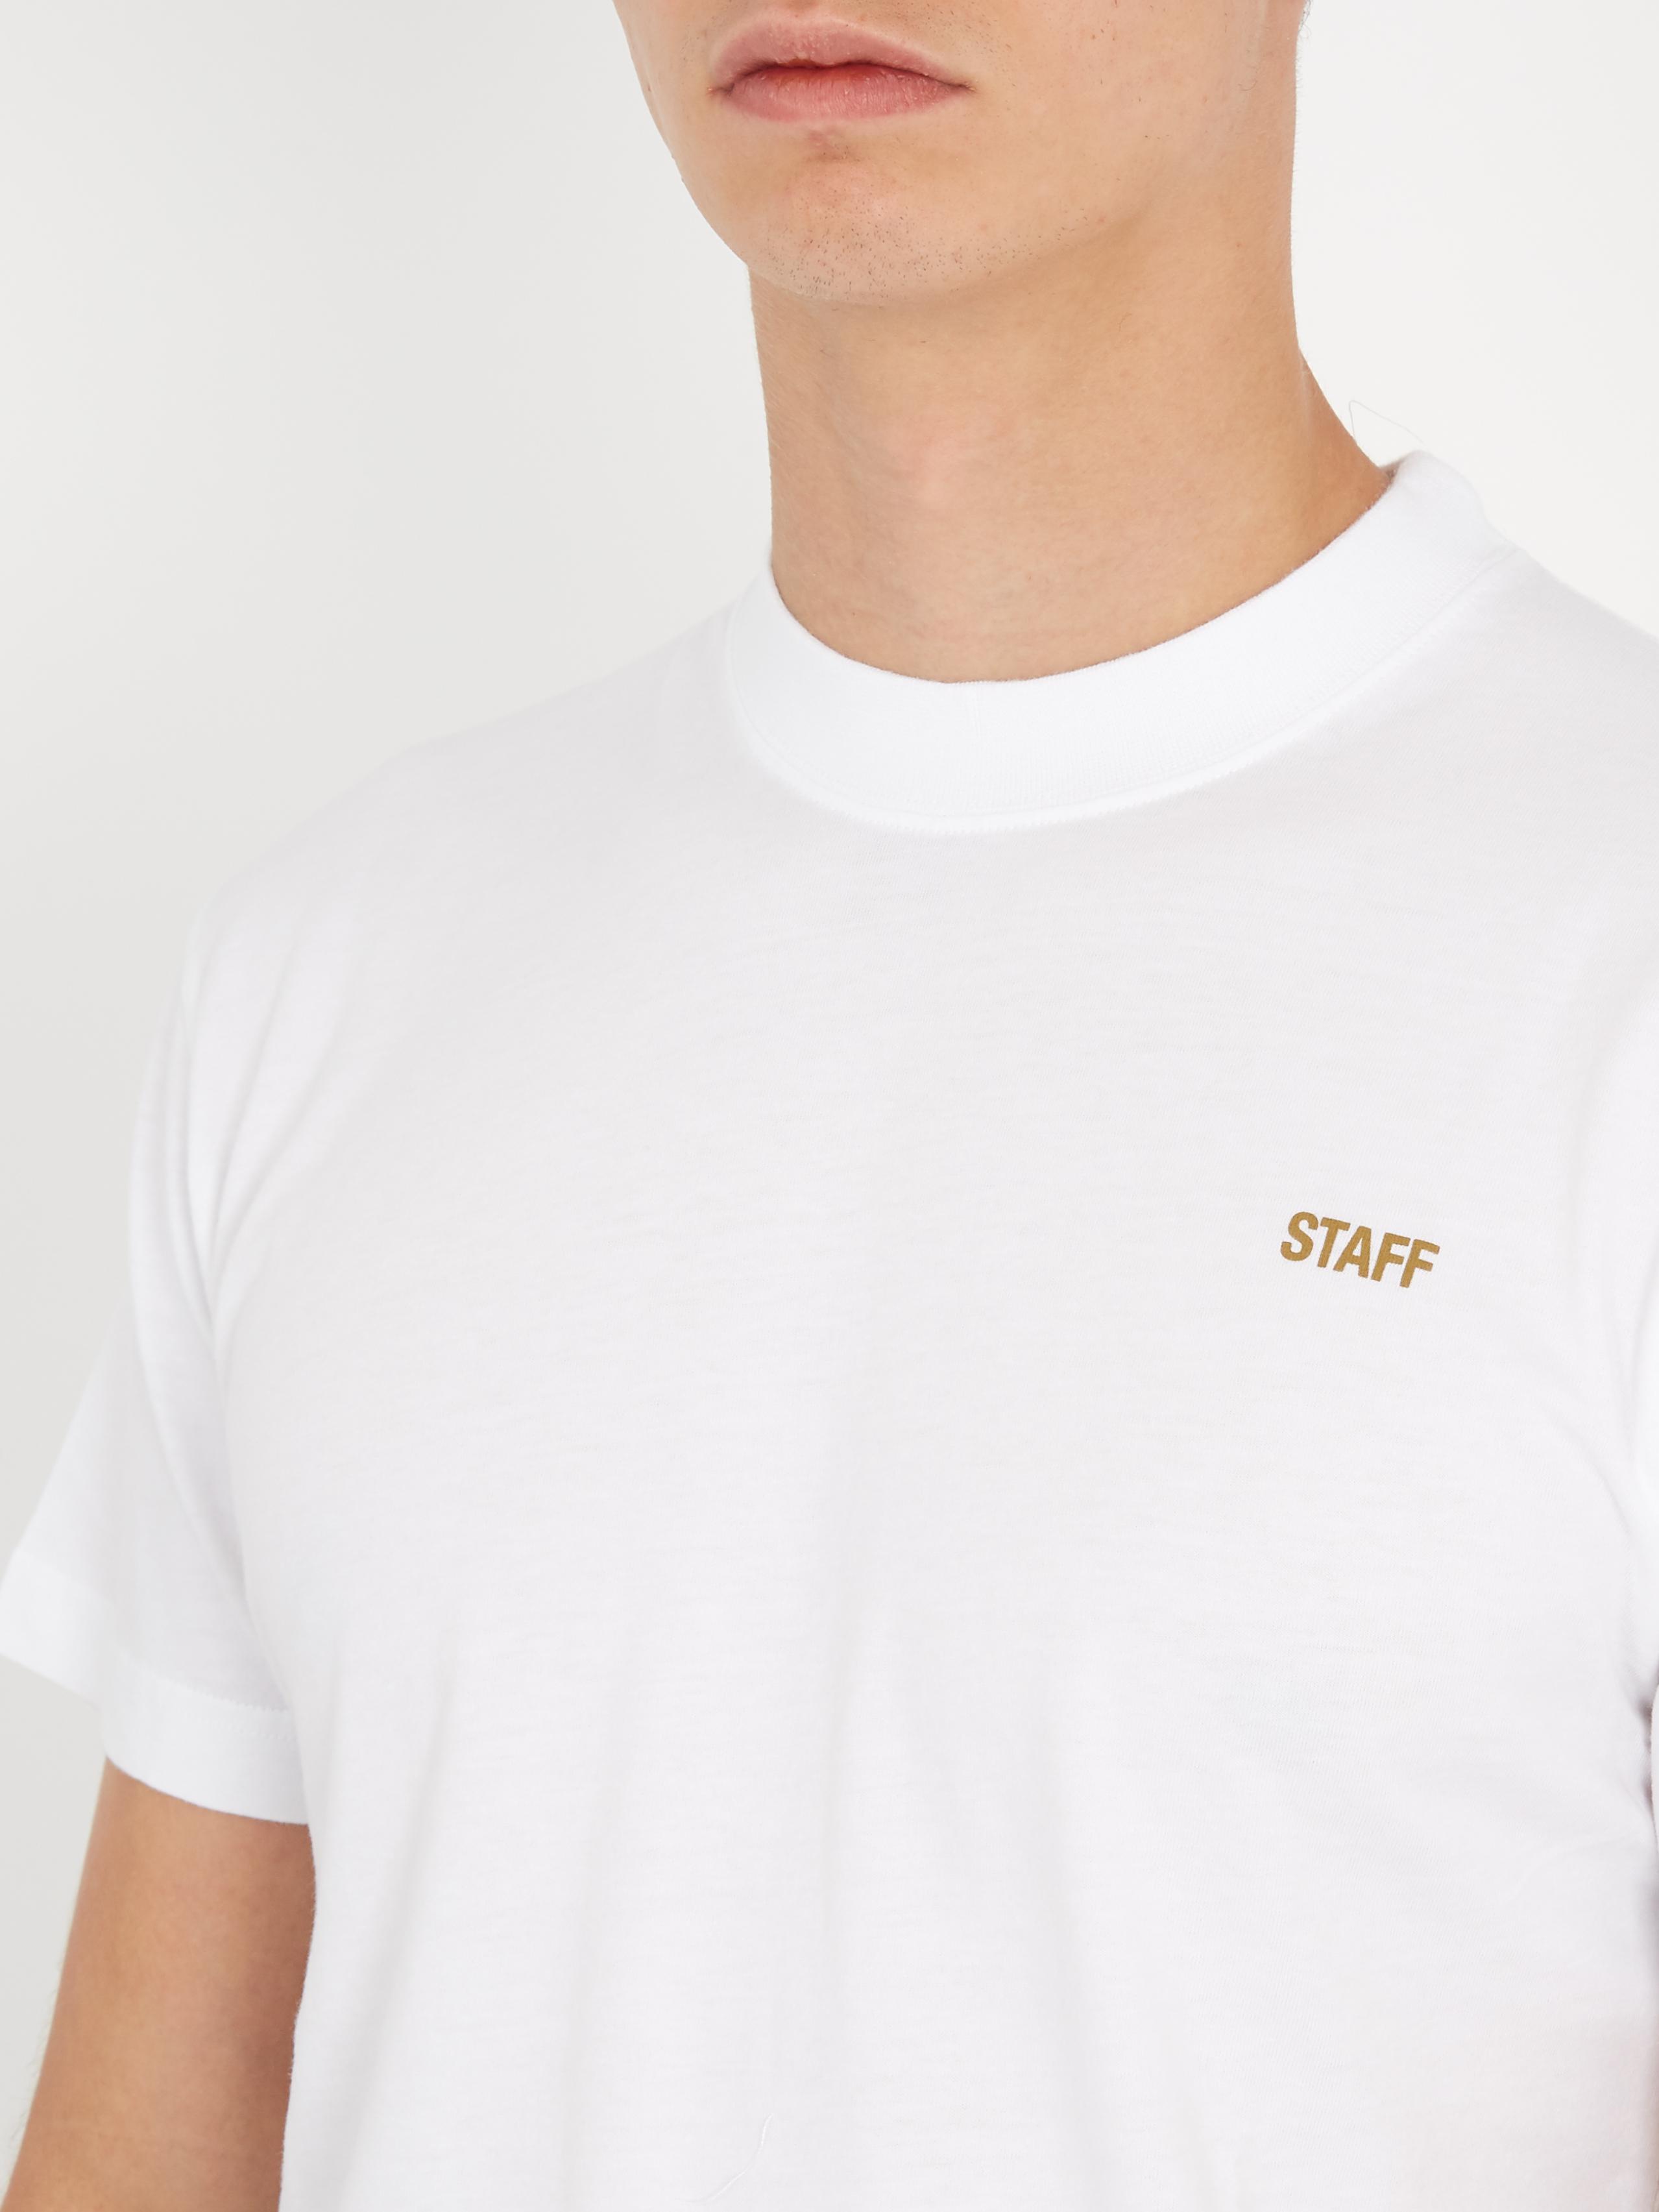 Vetements Staff Cotton T-shirt in White for Men | Lyst